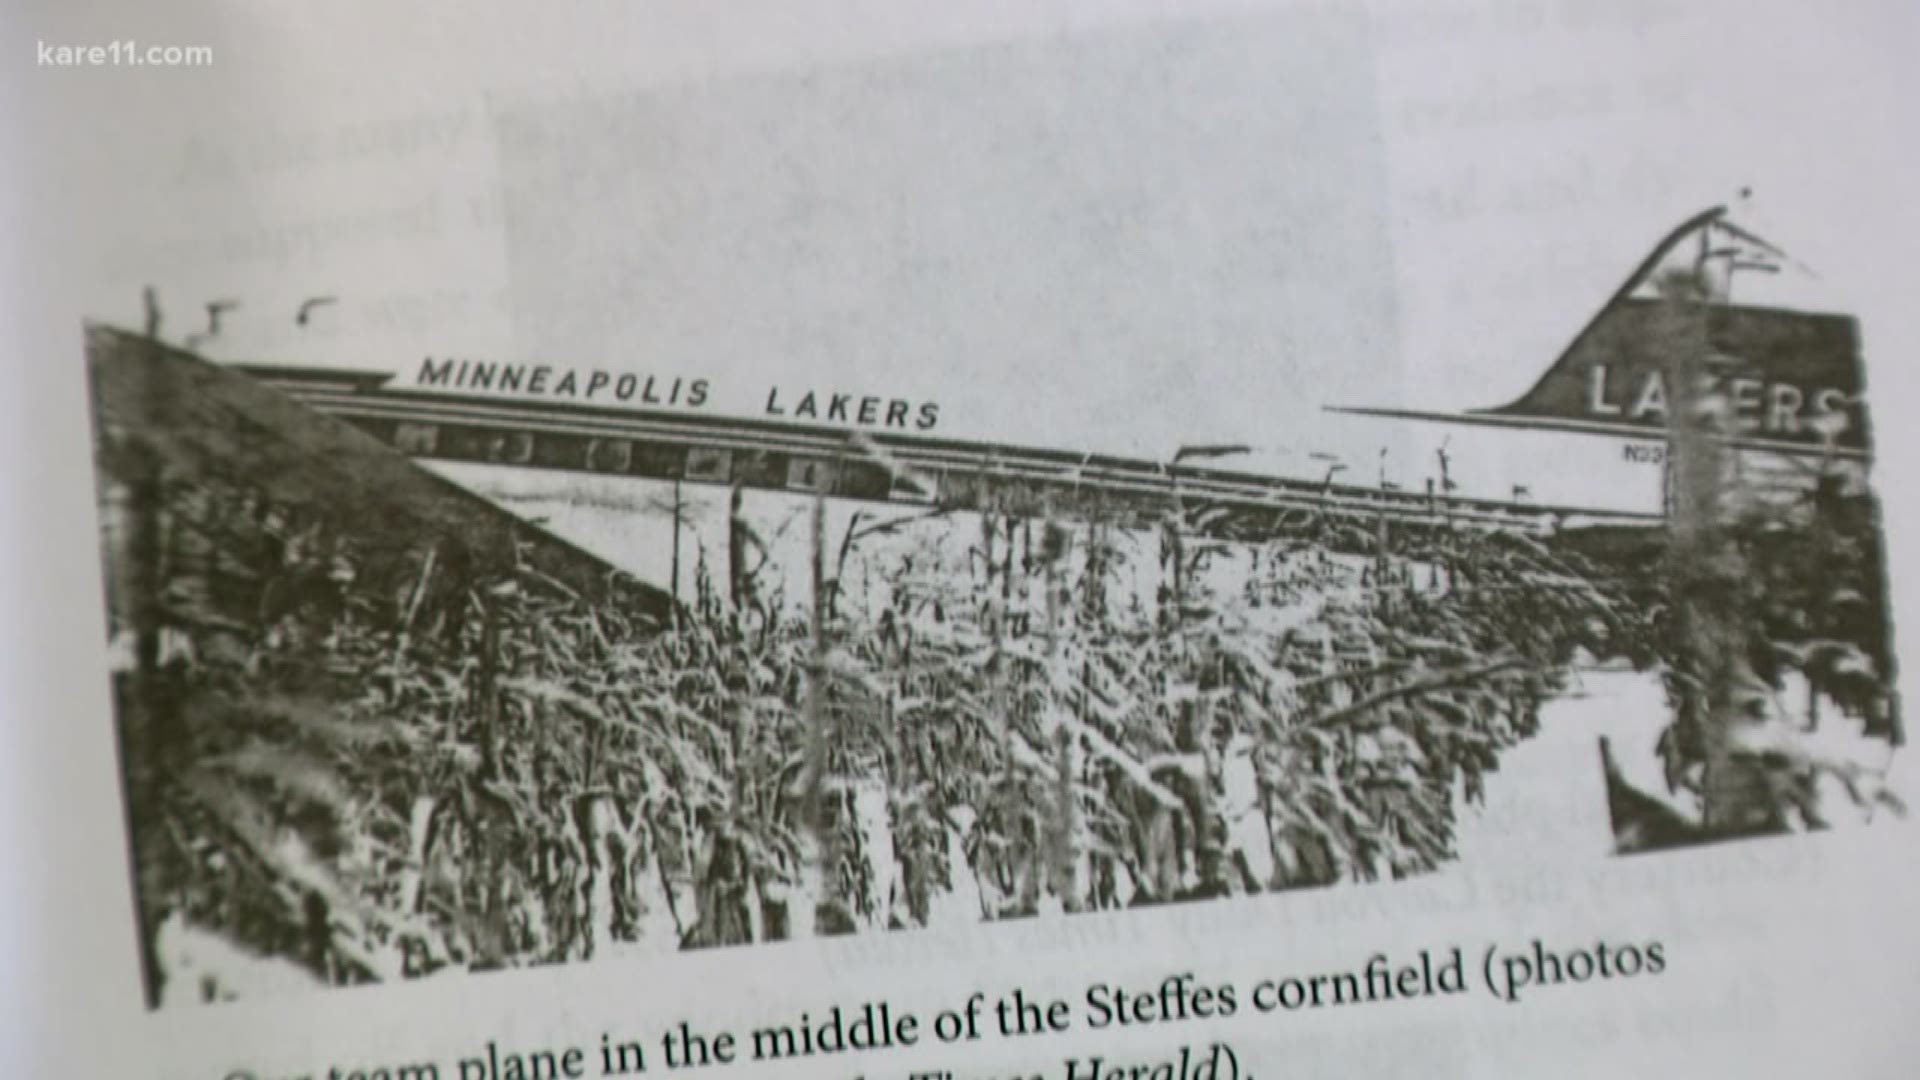 60 years ago, the pilots of DC-3 avoided disaster landing a flight carrying the Minneapolis Lakers in a cornfield.